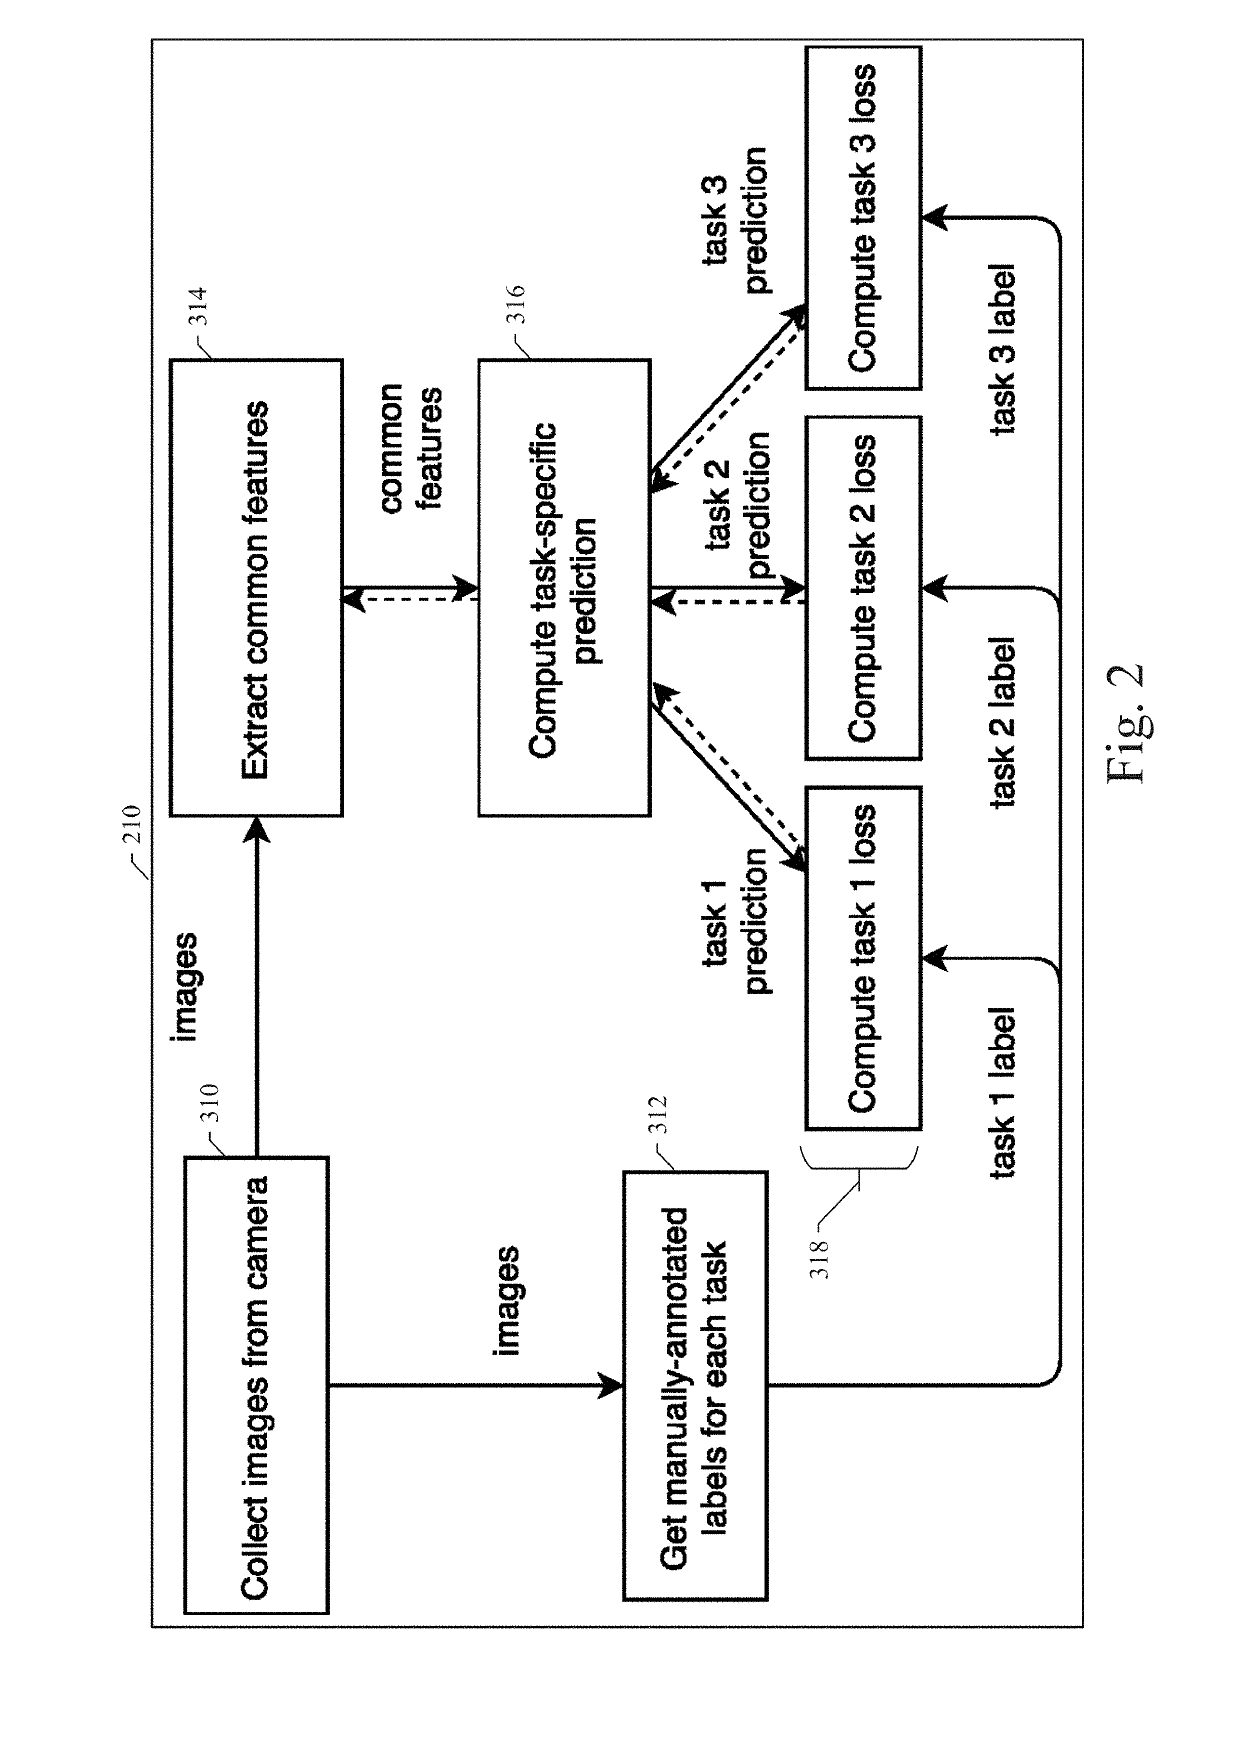 System and method for instance-level lane detection for autonomous vehicle control